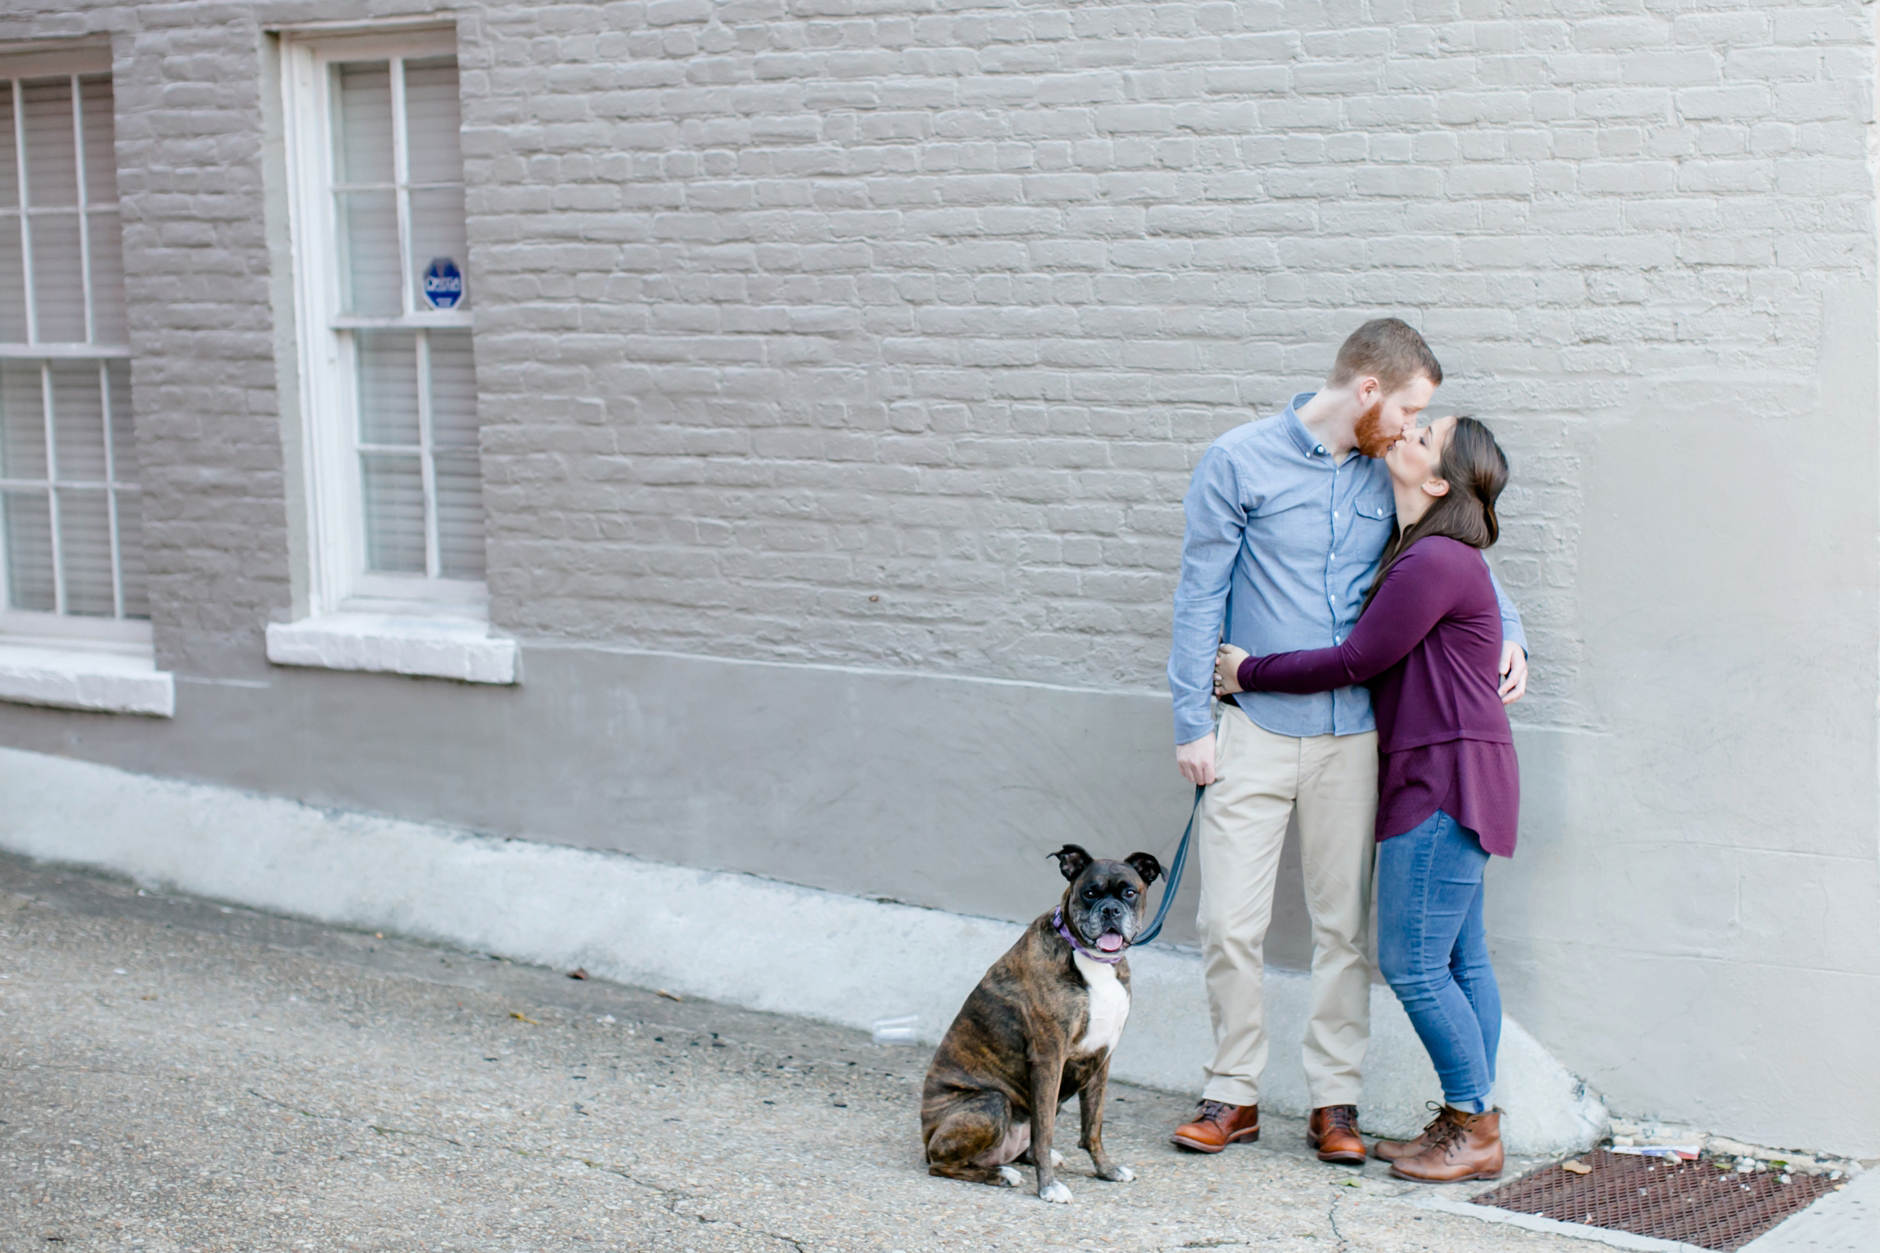 19downtown-fredericksburg-virginia-engagement-session-sarah-and-russell-1036